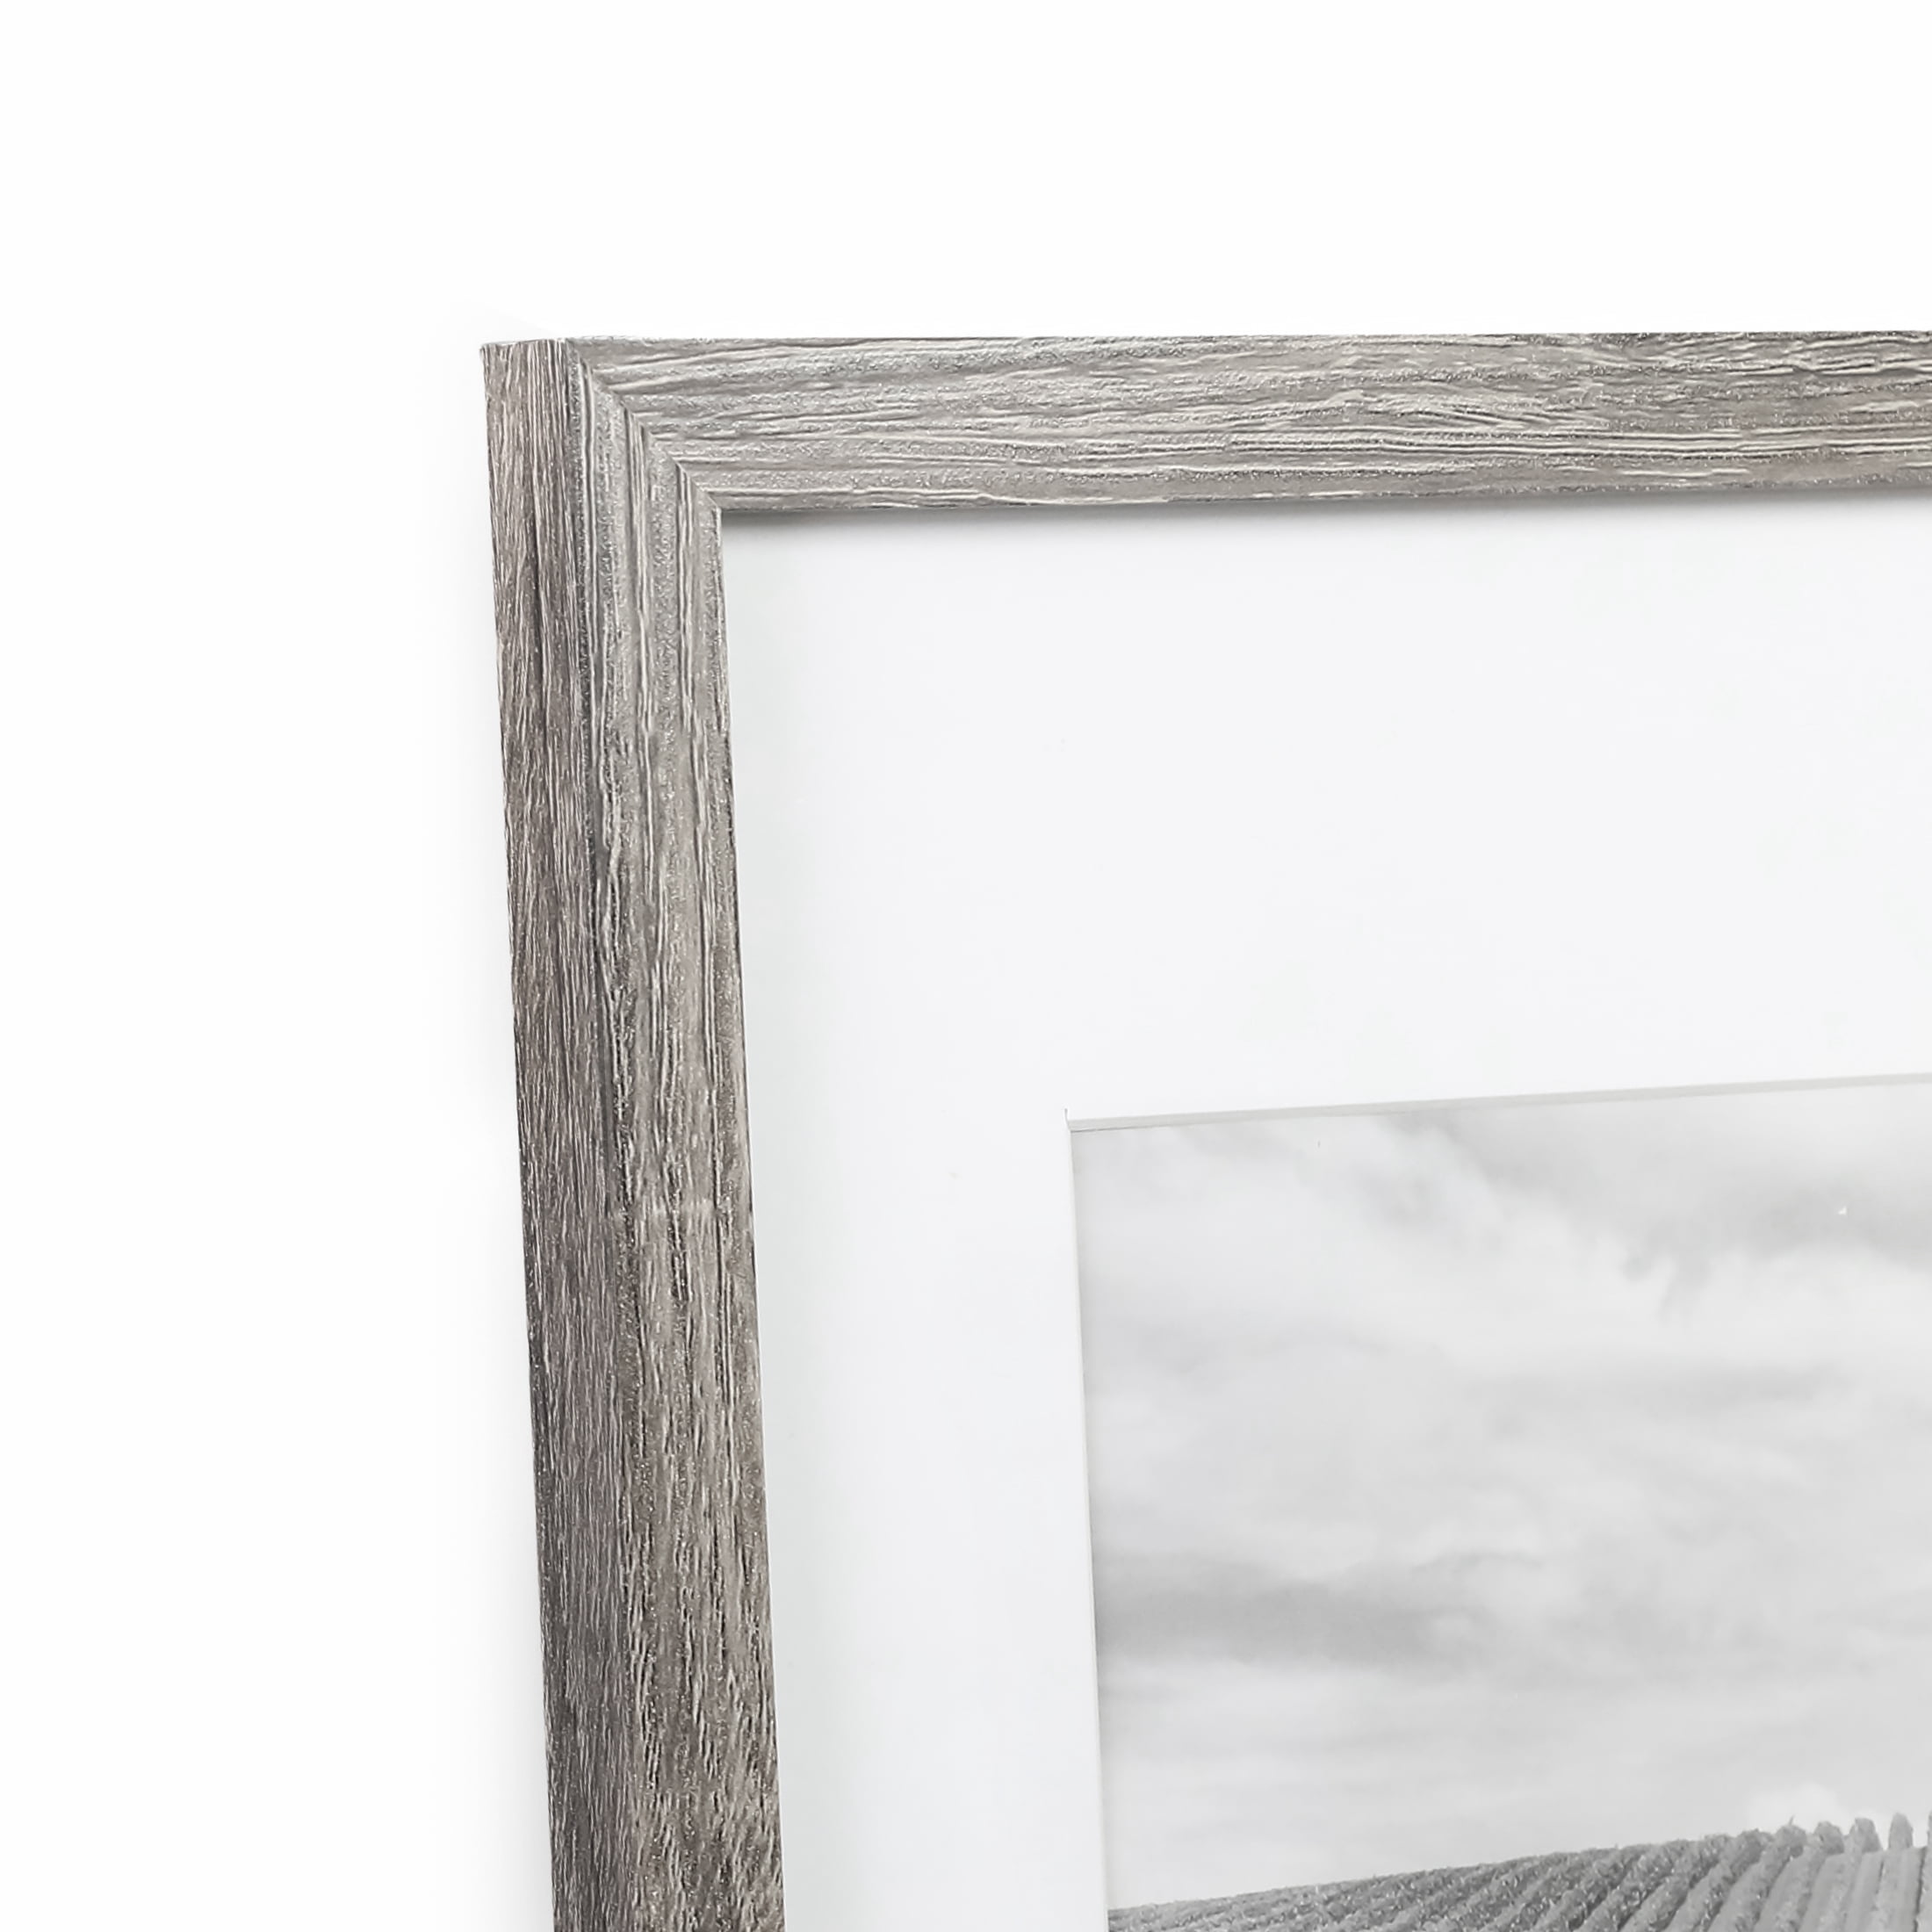 DesignOvation Gallery 11x14 matted to 8x10 Gray Picture Frame Set of 4  213637 - The Home Depot